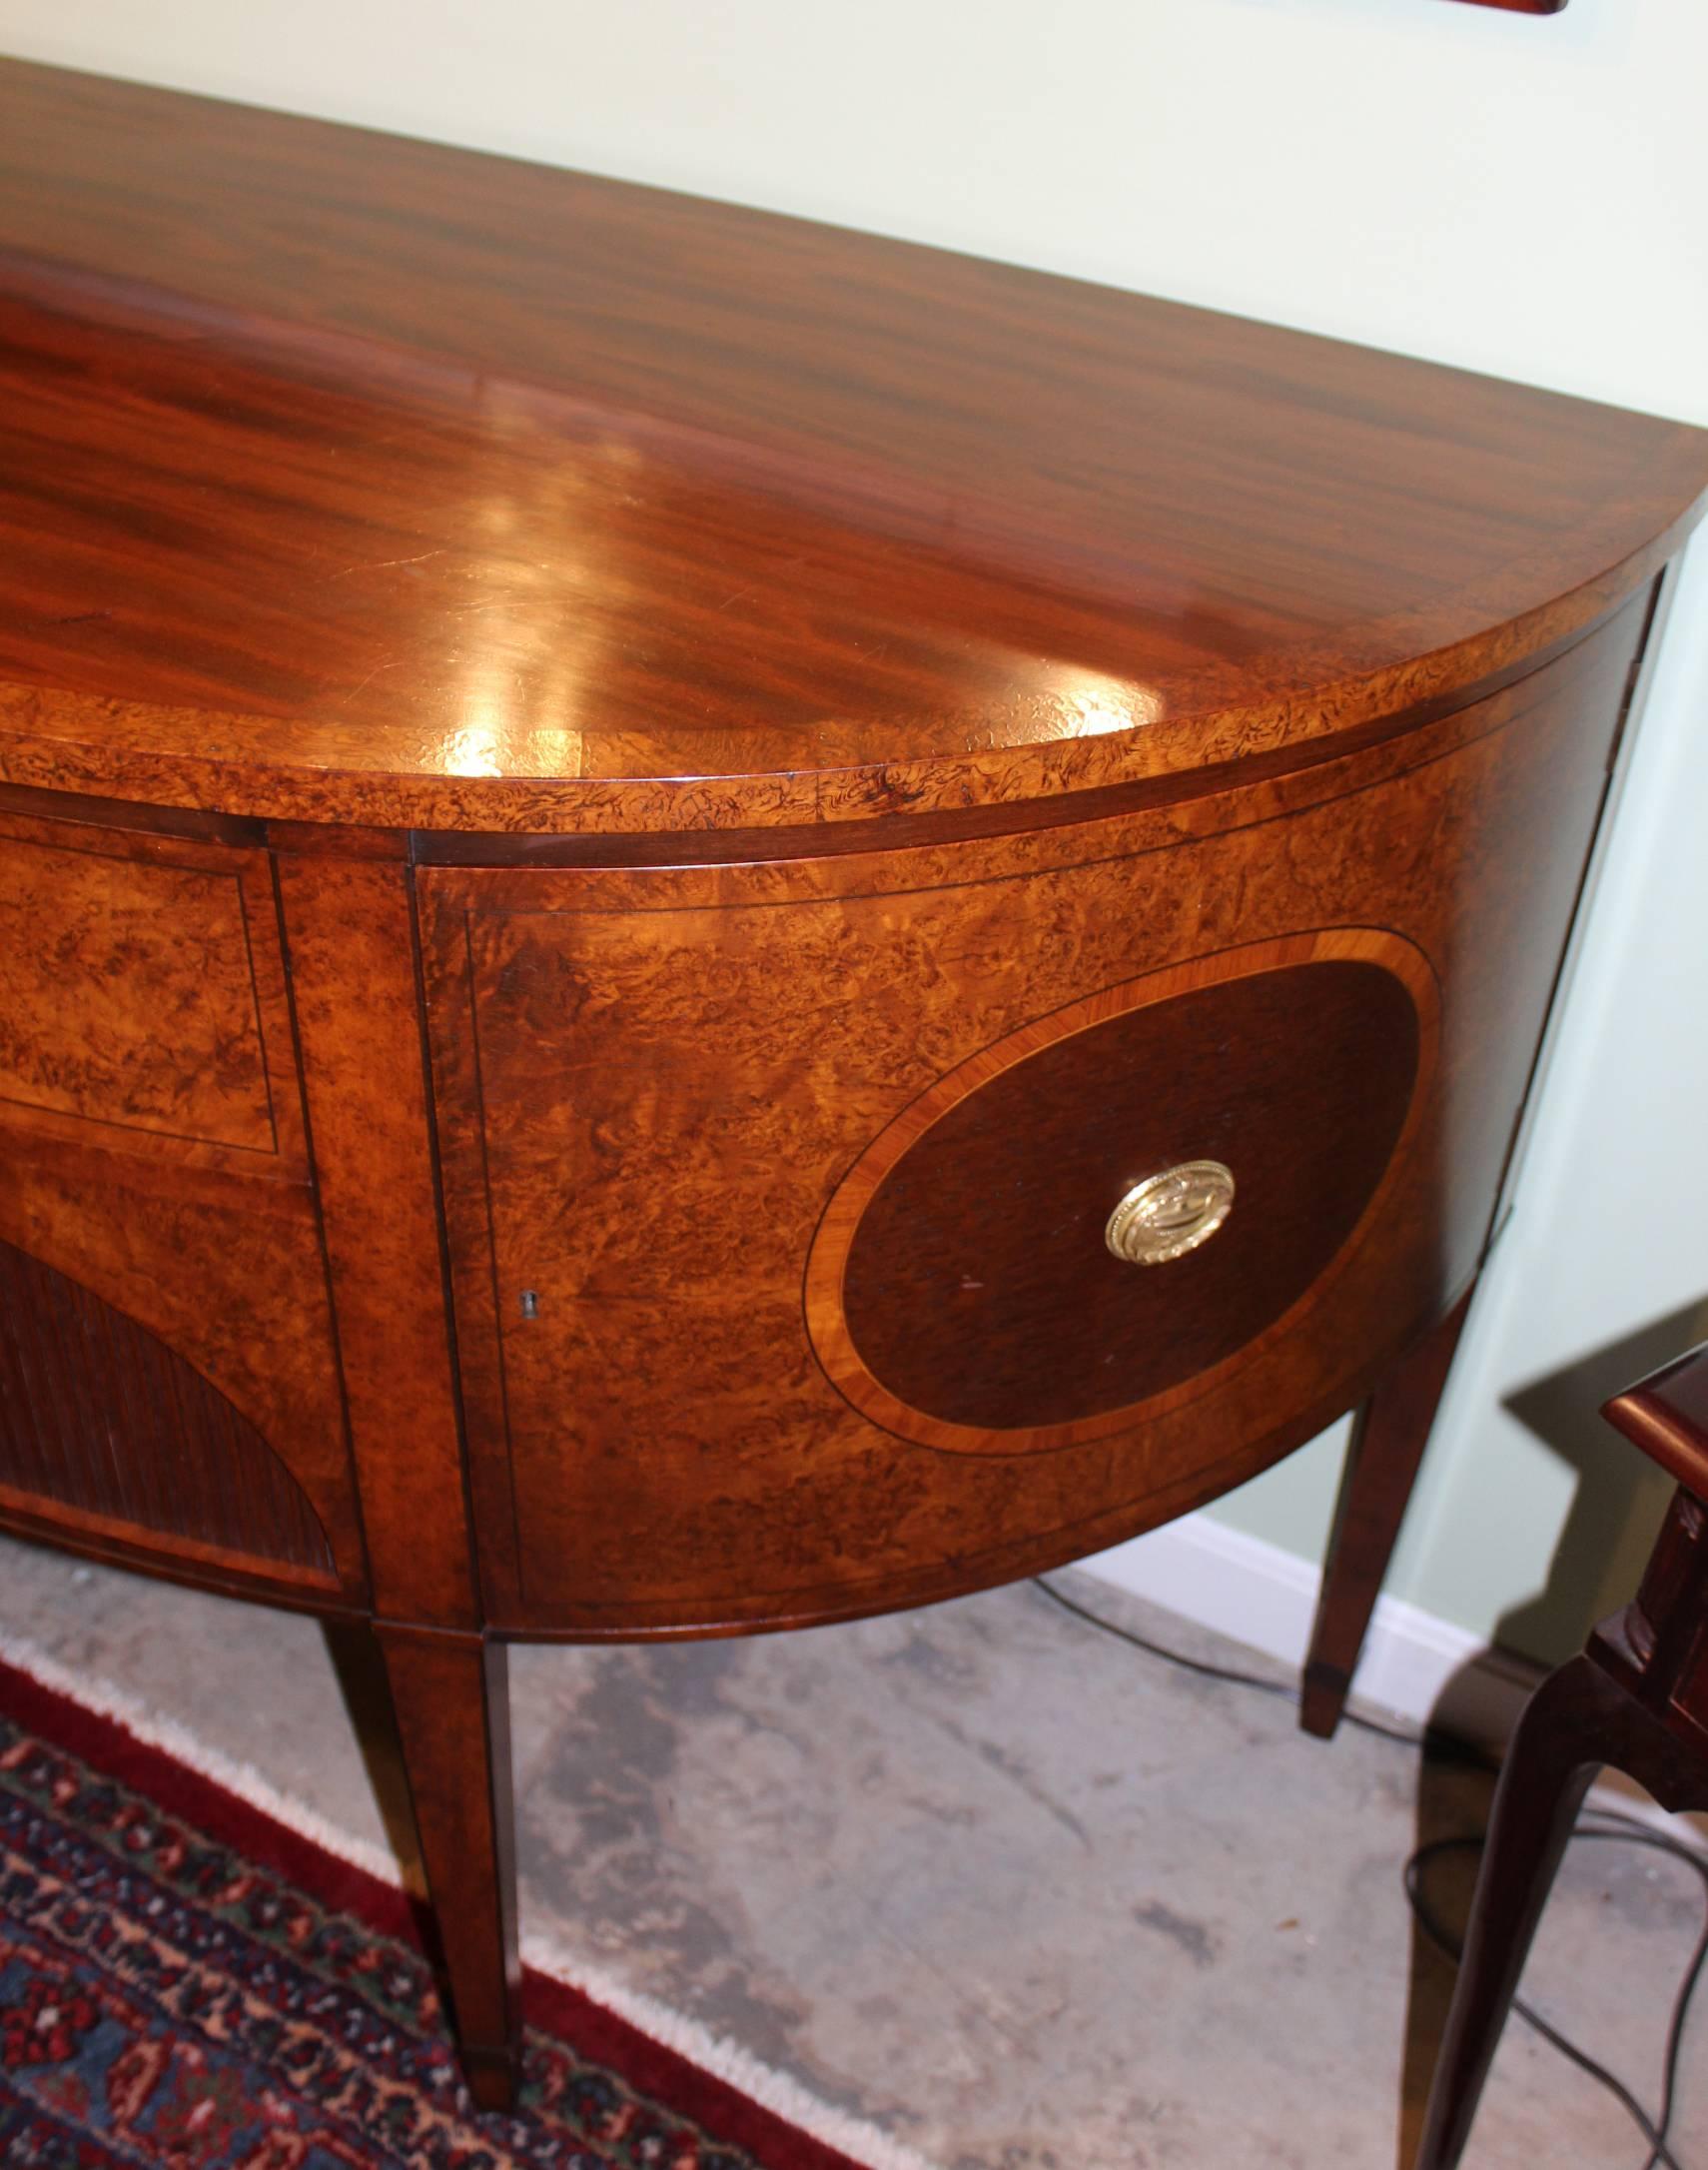 20th Century Demilune Mahogany Sideboard or Server with Burled Walnut and Tambour Doors